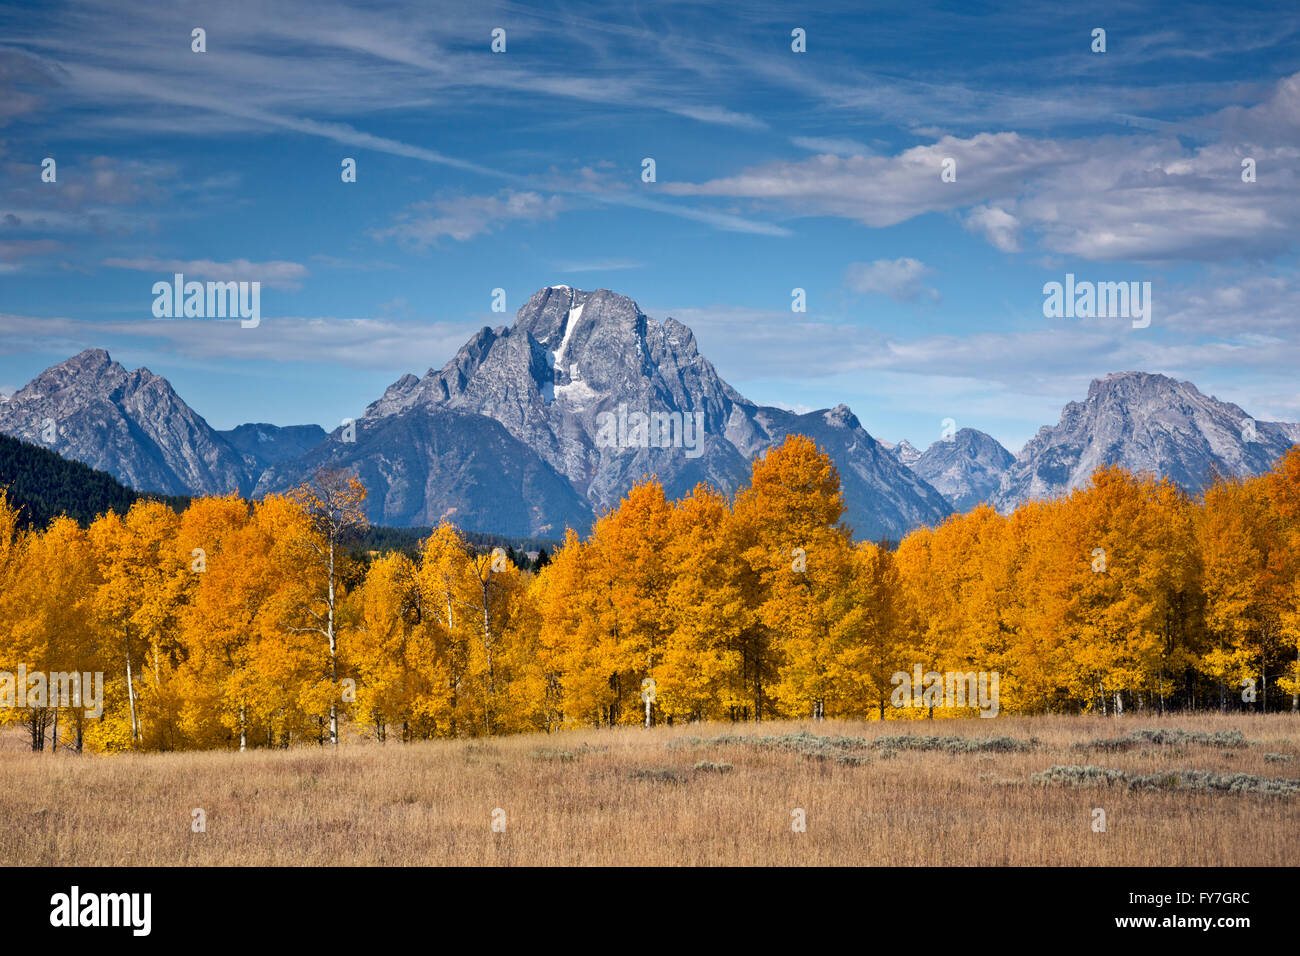 WY01544-00...WYOMING - Aspen trees in fall color and Mount Moran in Grand Teton National Park. Stock Photo